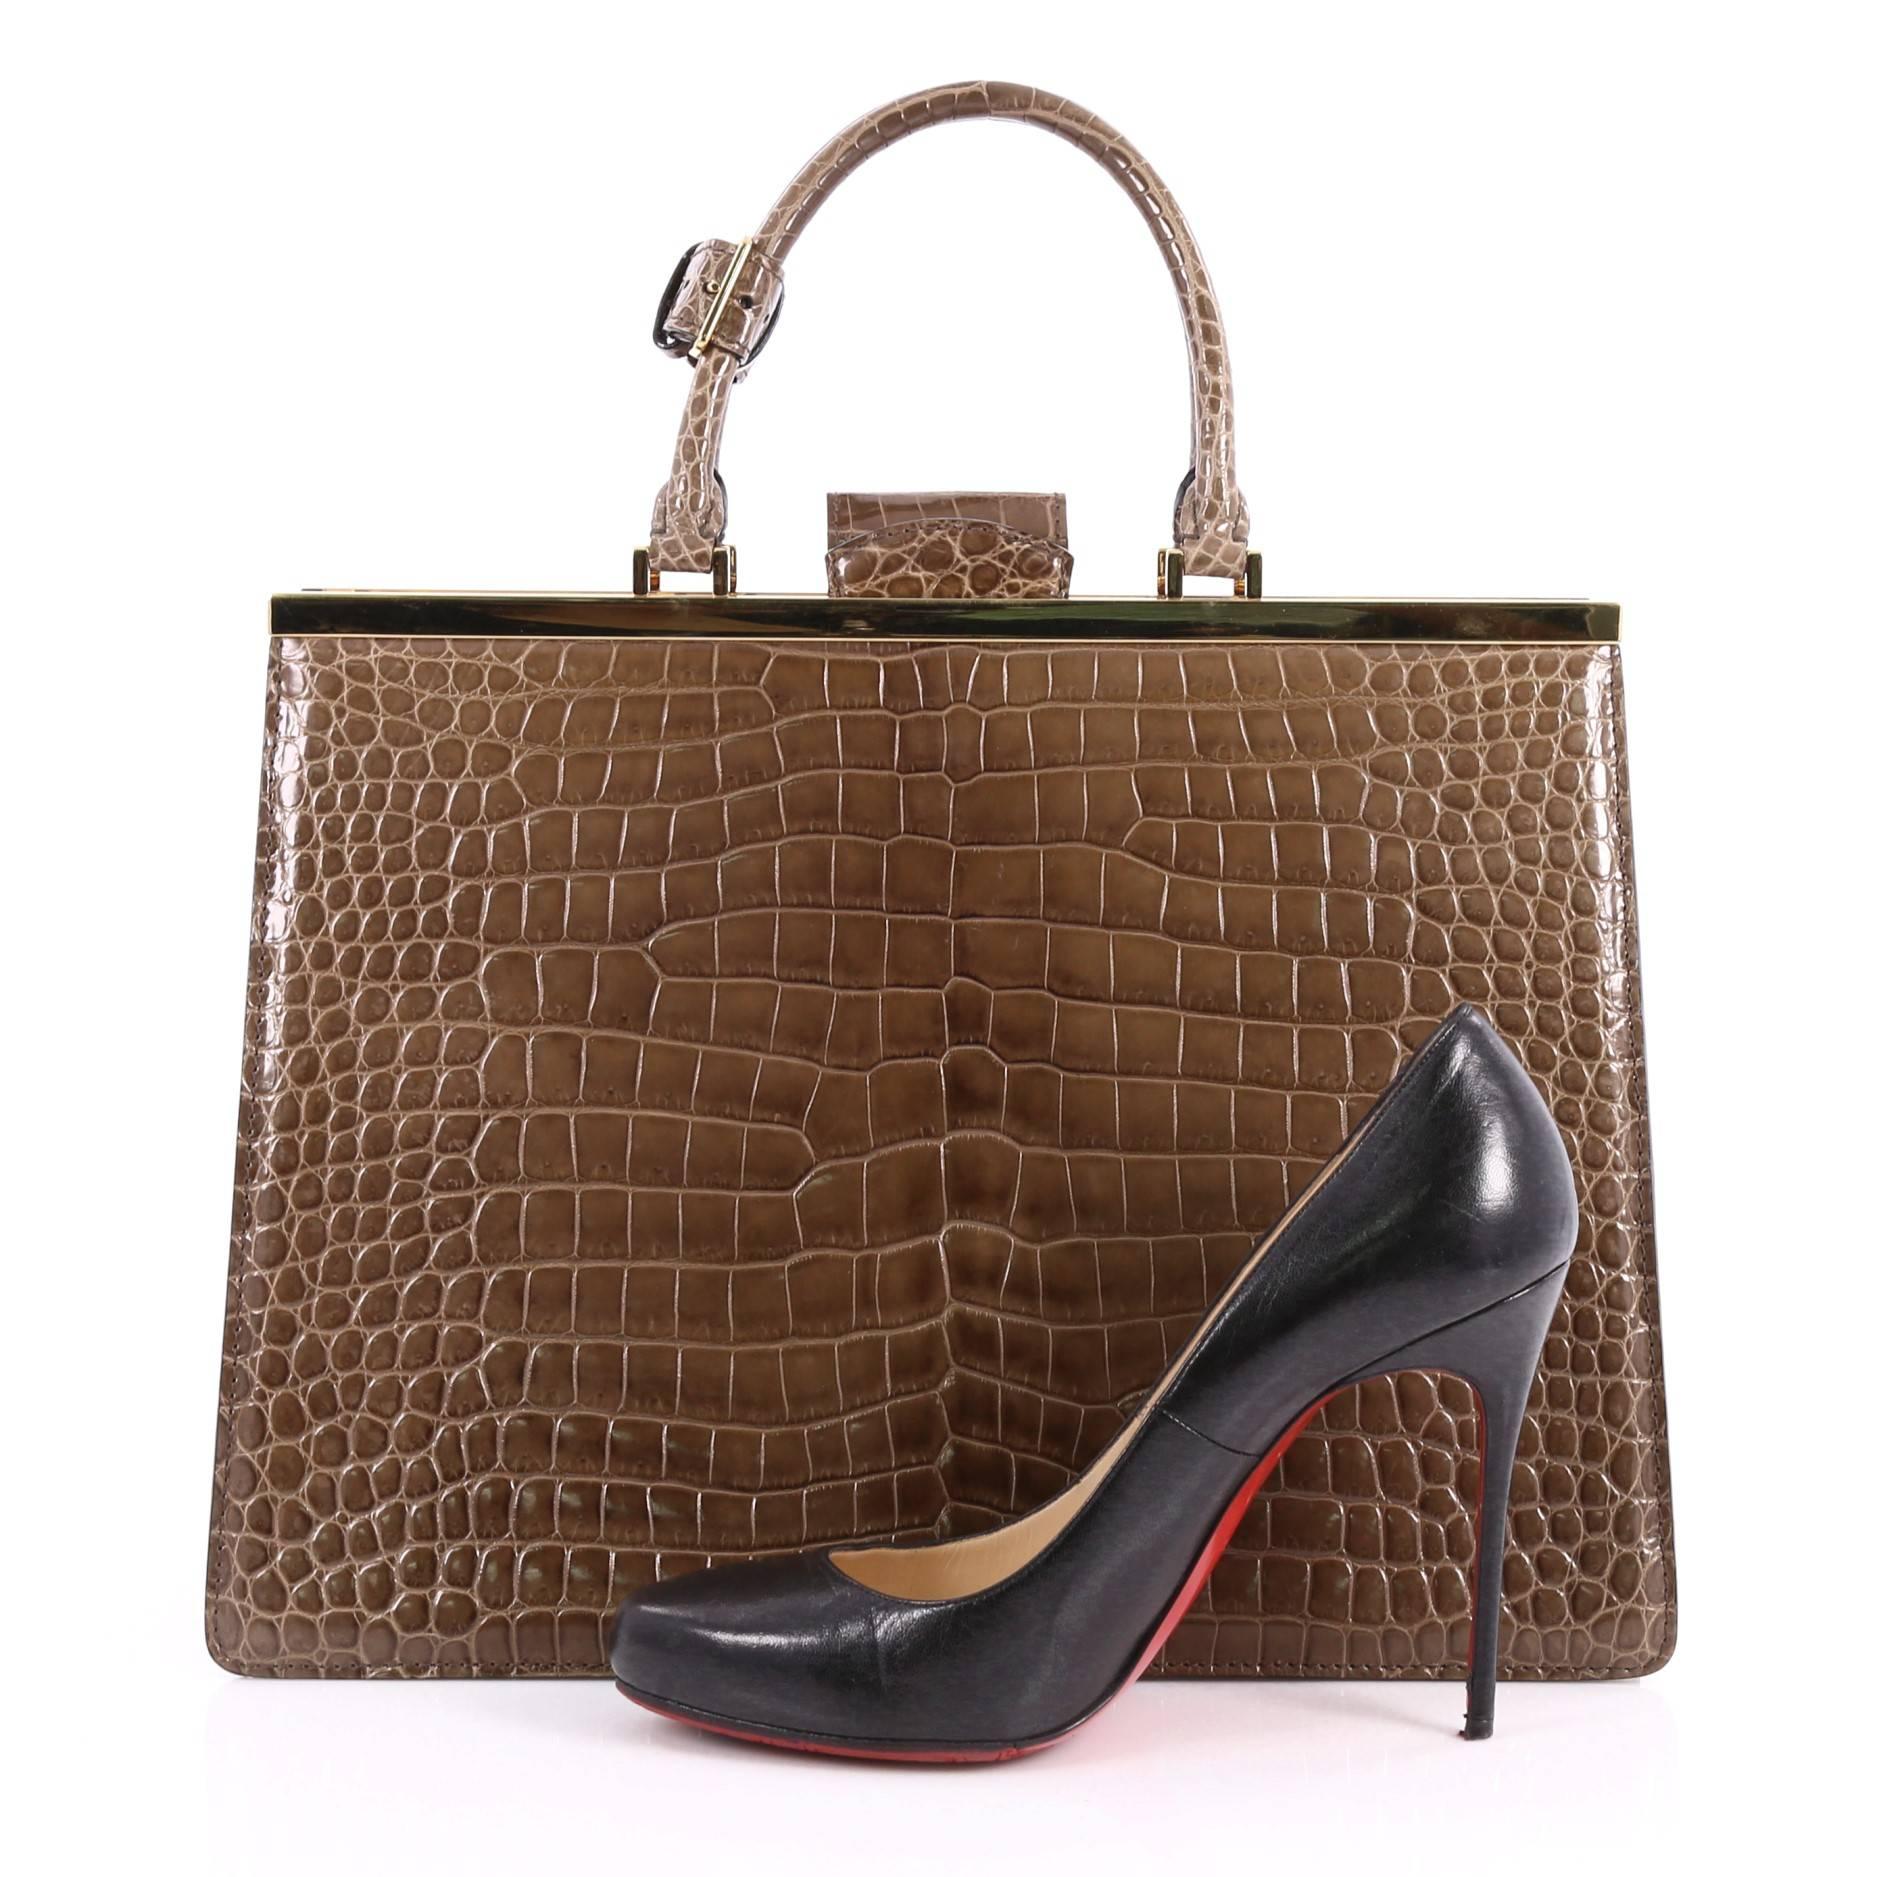 This authentic Louis Vuitton Deesse Handbag Crocodile MM inspired by 1950s retro-feminine glam is a luxurious tote for day or nights out. Crafted from genuine rustic brown crocodile, this sophisticated bag features dual-rolled top handles, lady-like